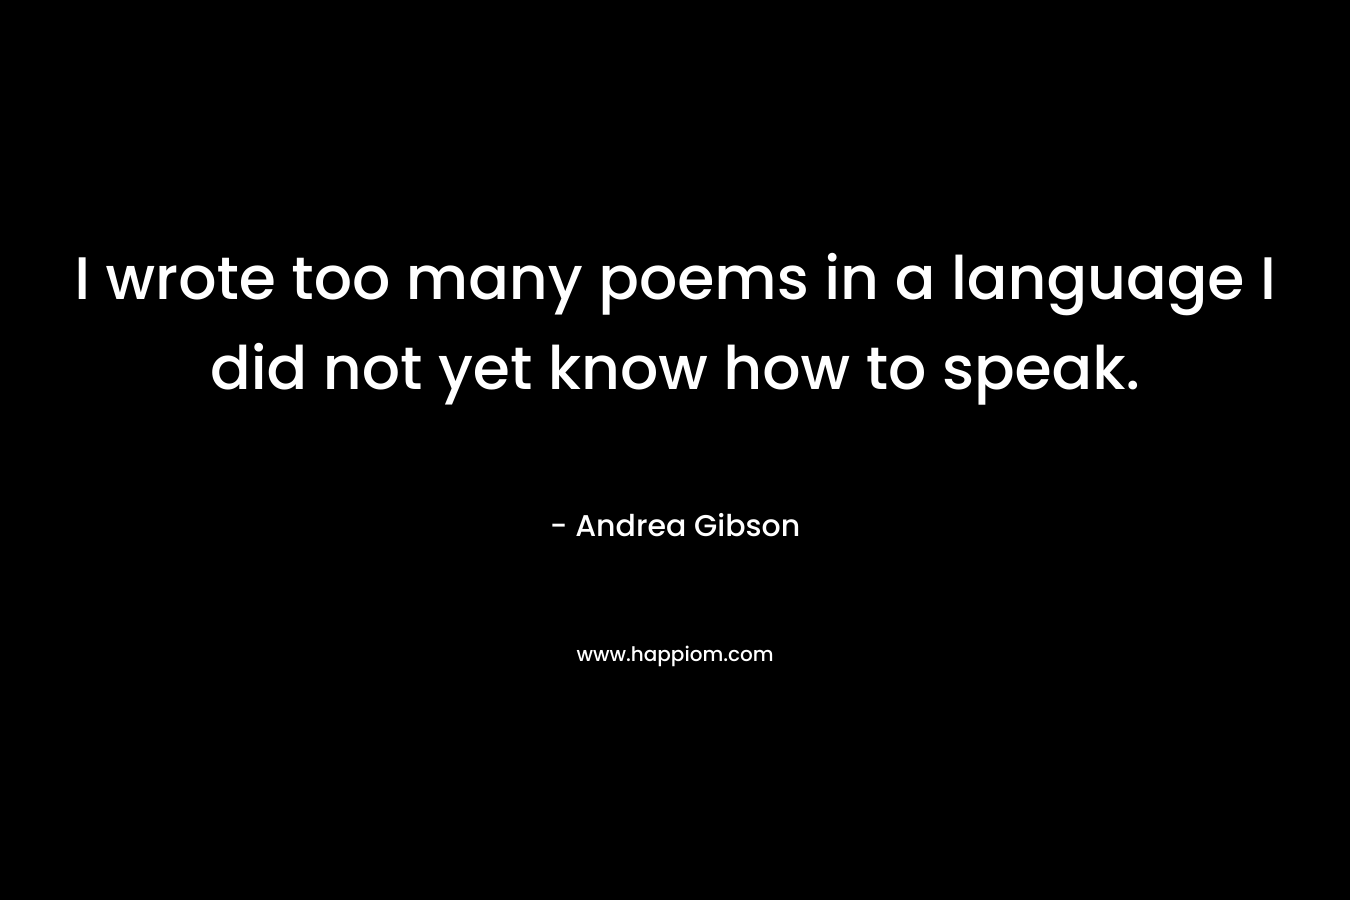 I wrote too many poems in a language I did not yet know how to speak. – Andrea Gibson